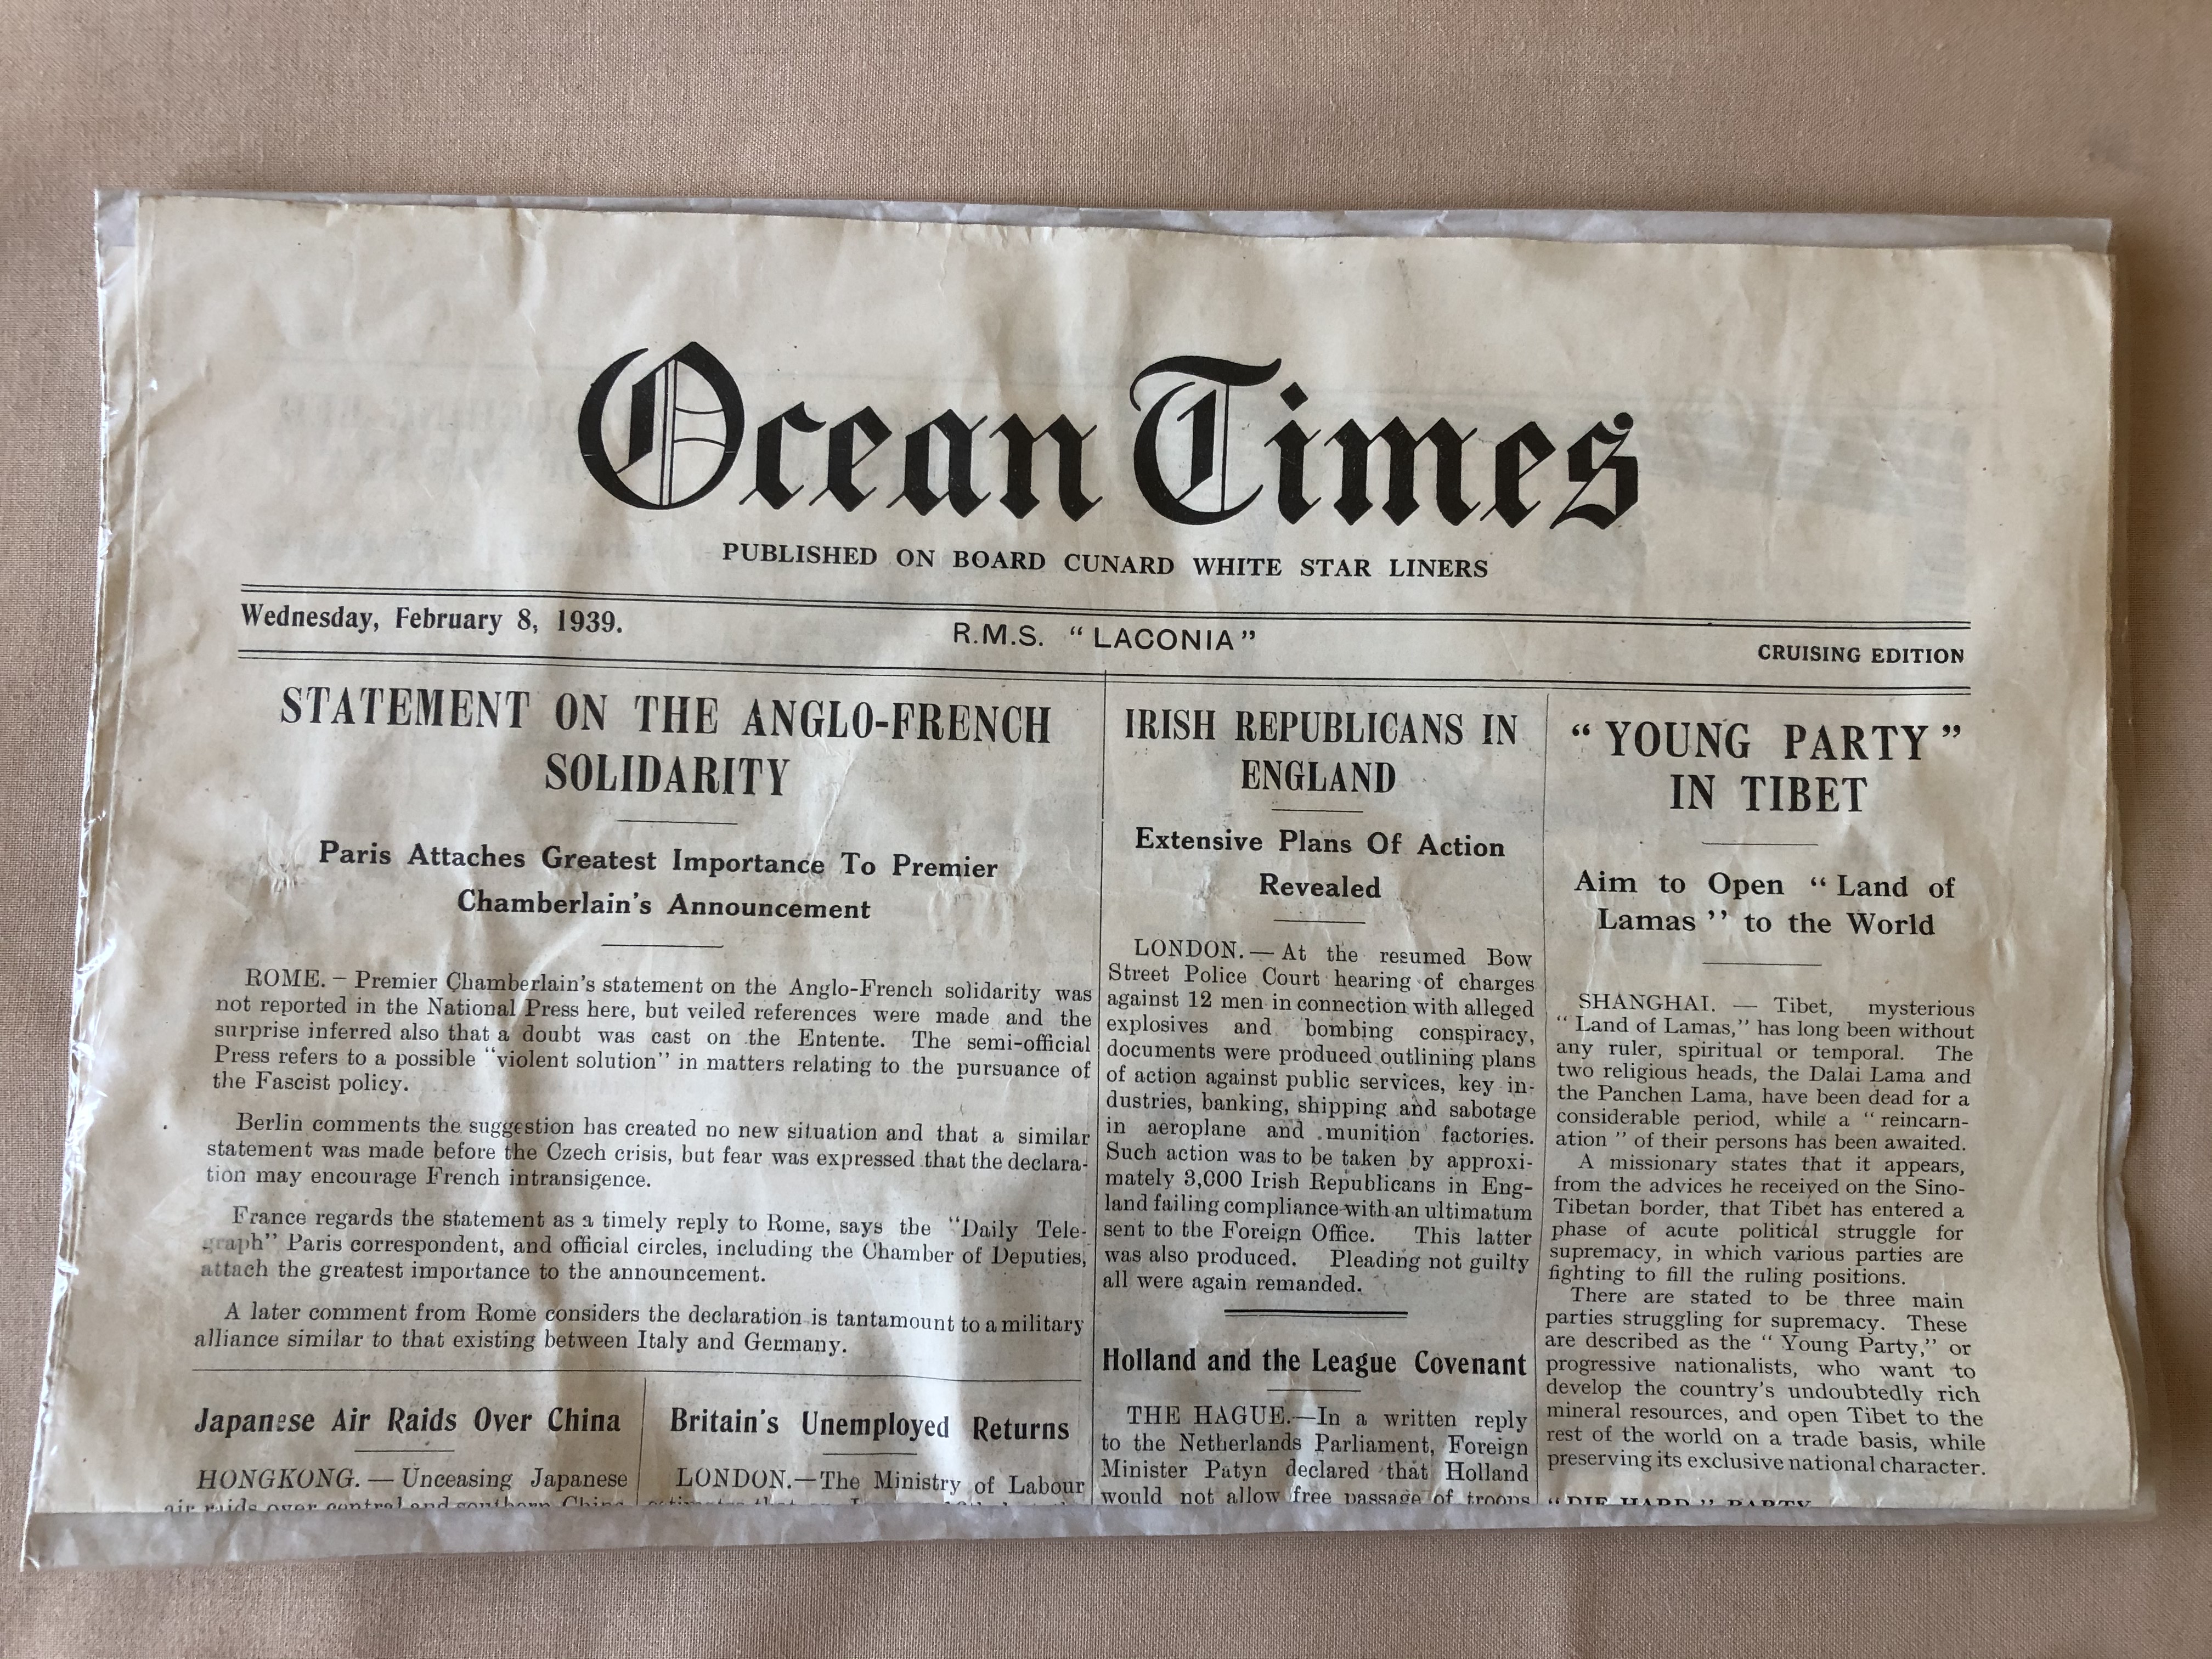 VERY RARE TO FIND EDITION OF THE SHIP NEWSPAPER THE 'OCEAN TIMES' FROM THE RMS LACONIA